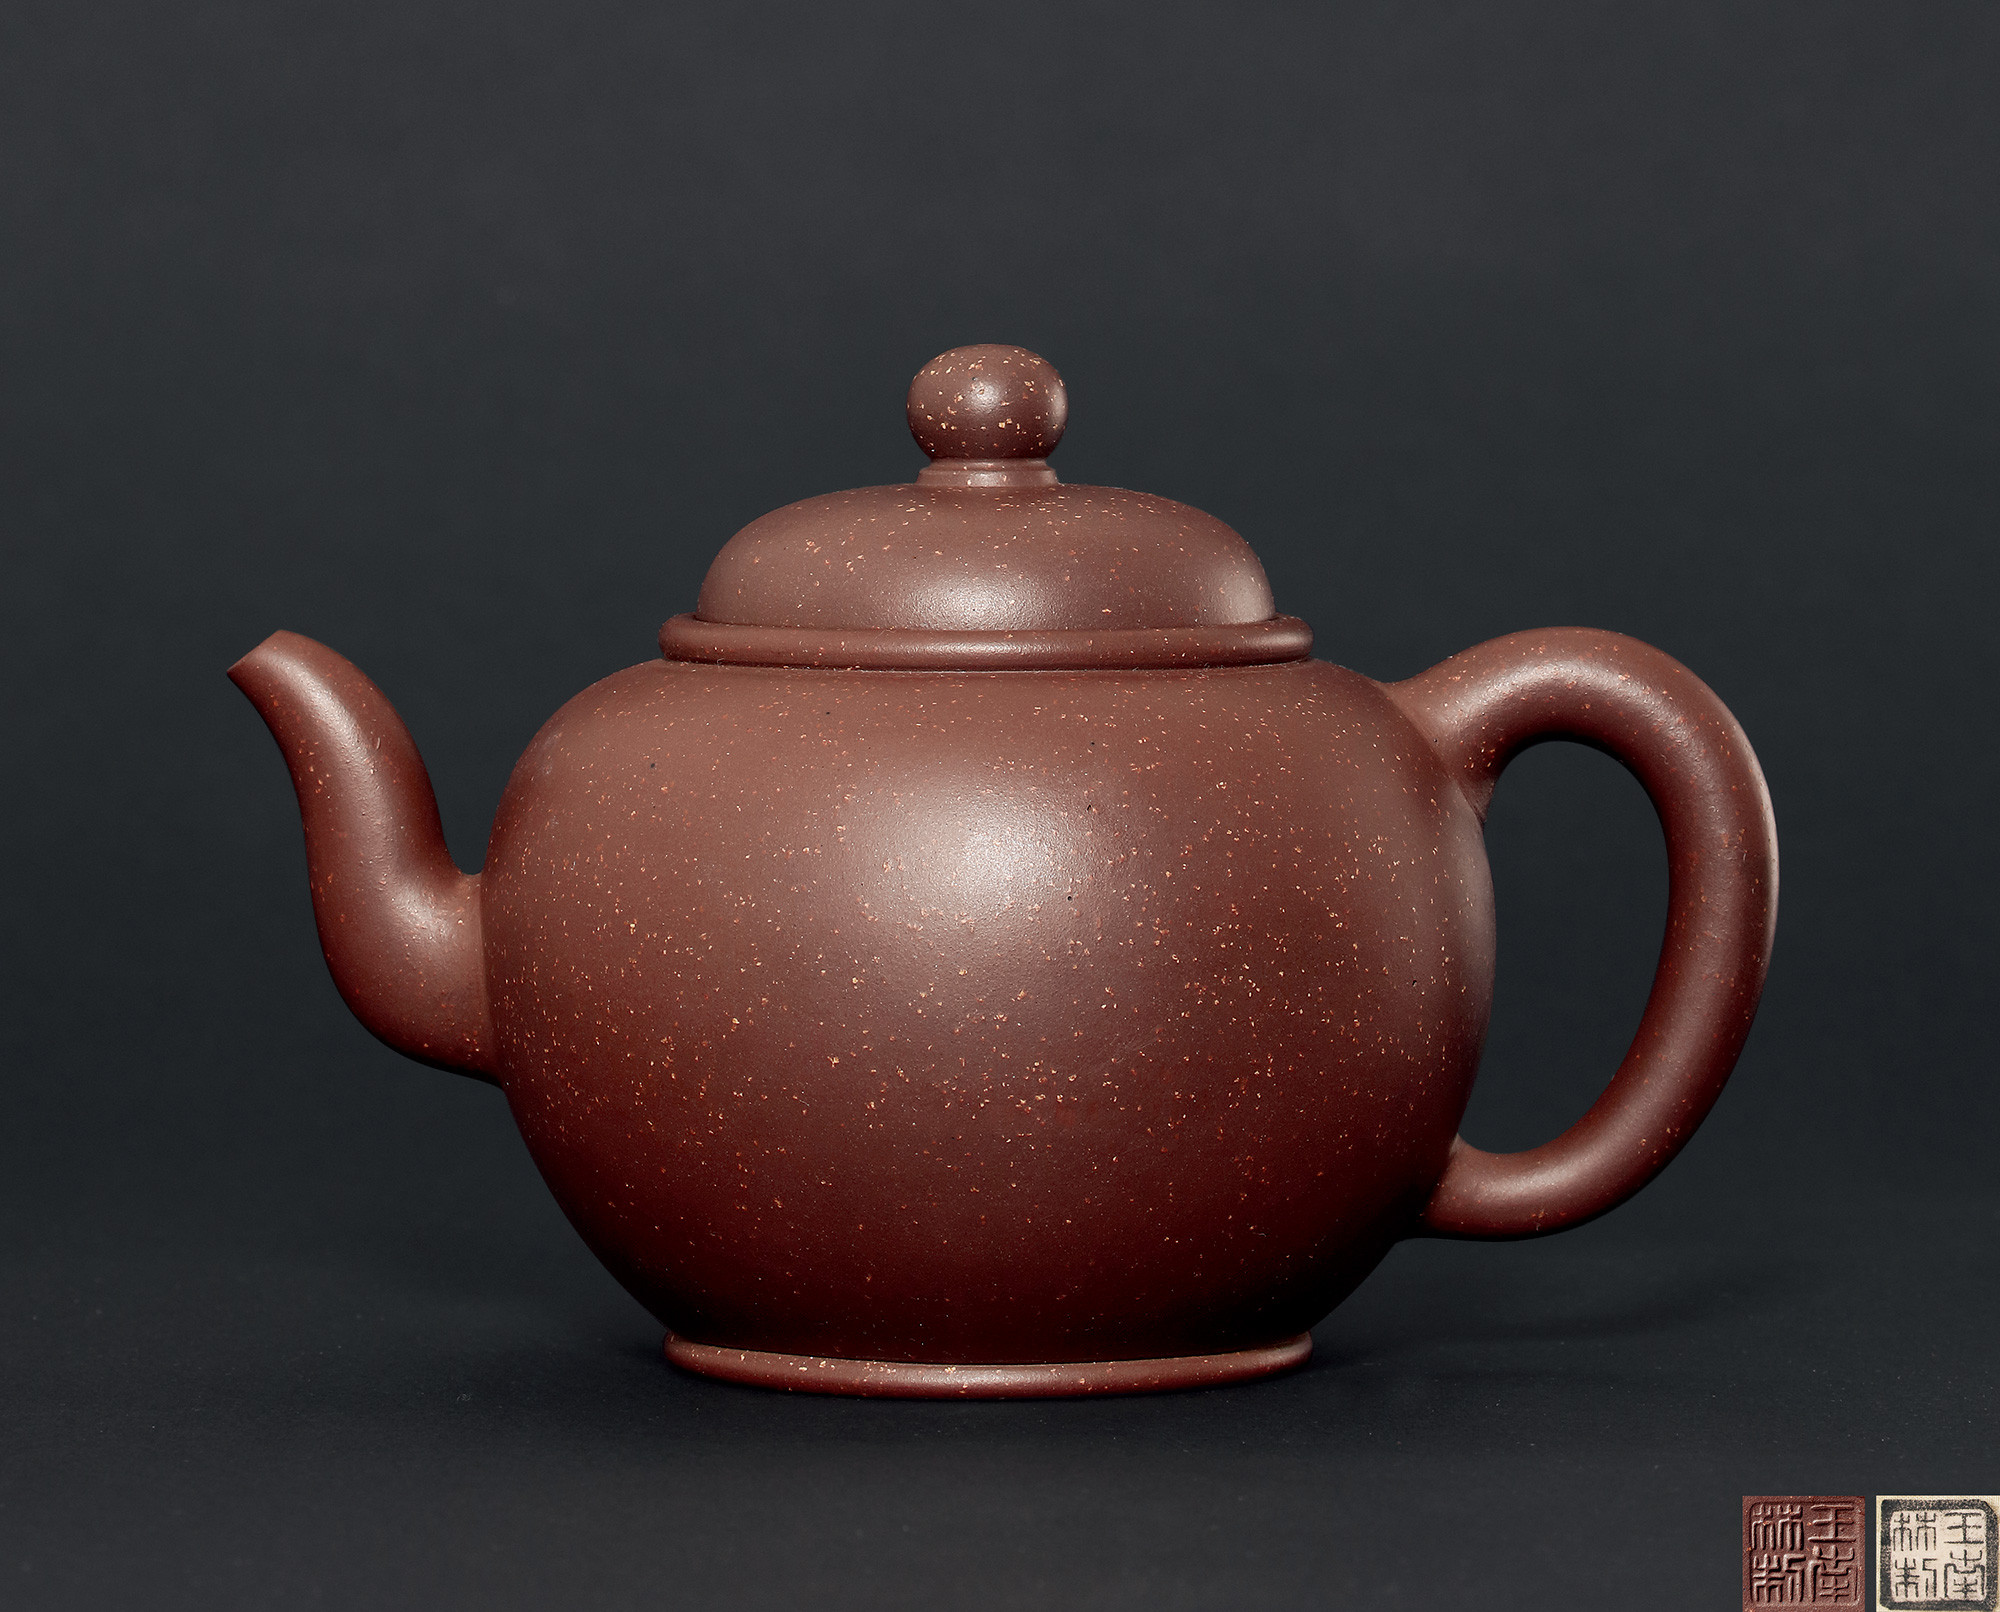 Gong Xinzhao’s Collection，Made by Wang Nanlin BALL SHAPED TEAPOT WITH ROUND KNOB